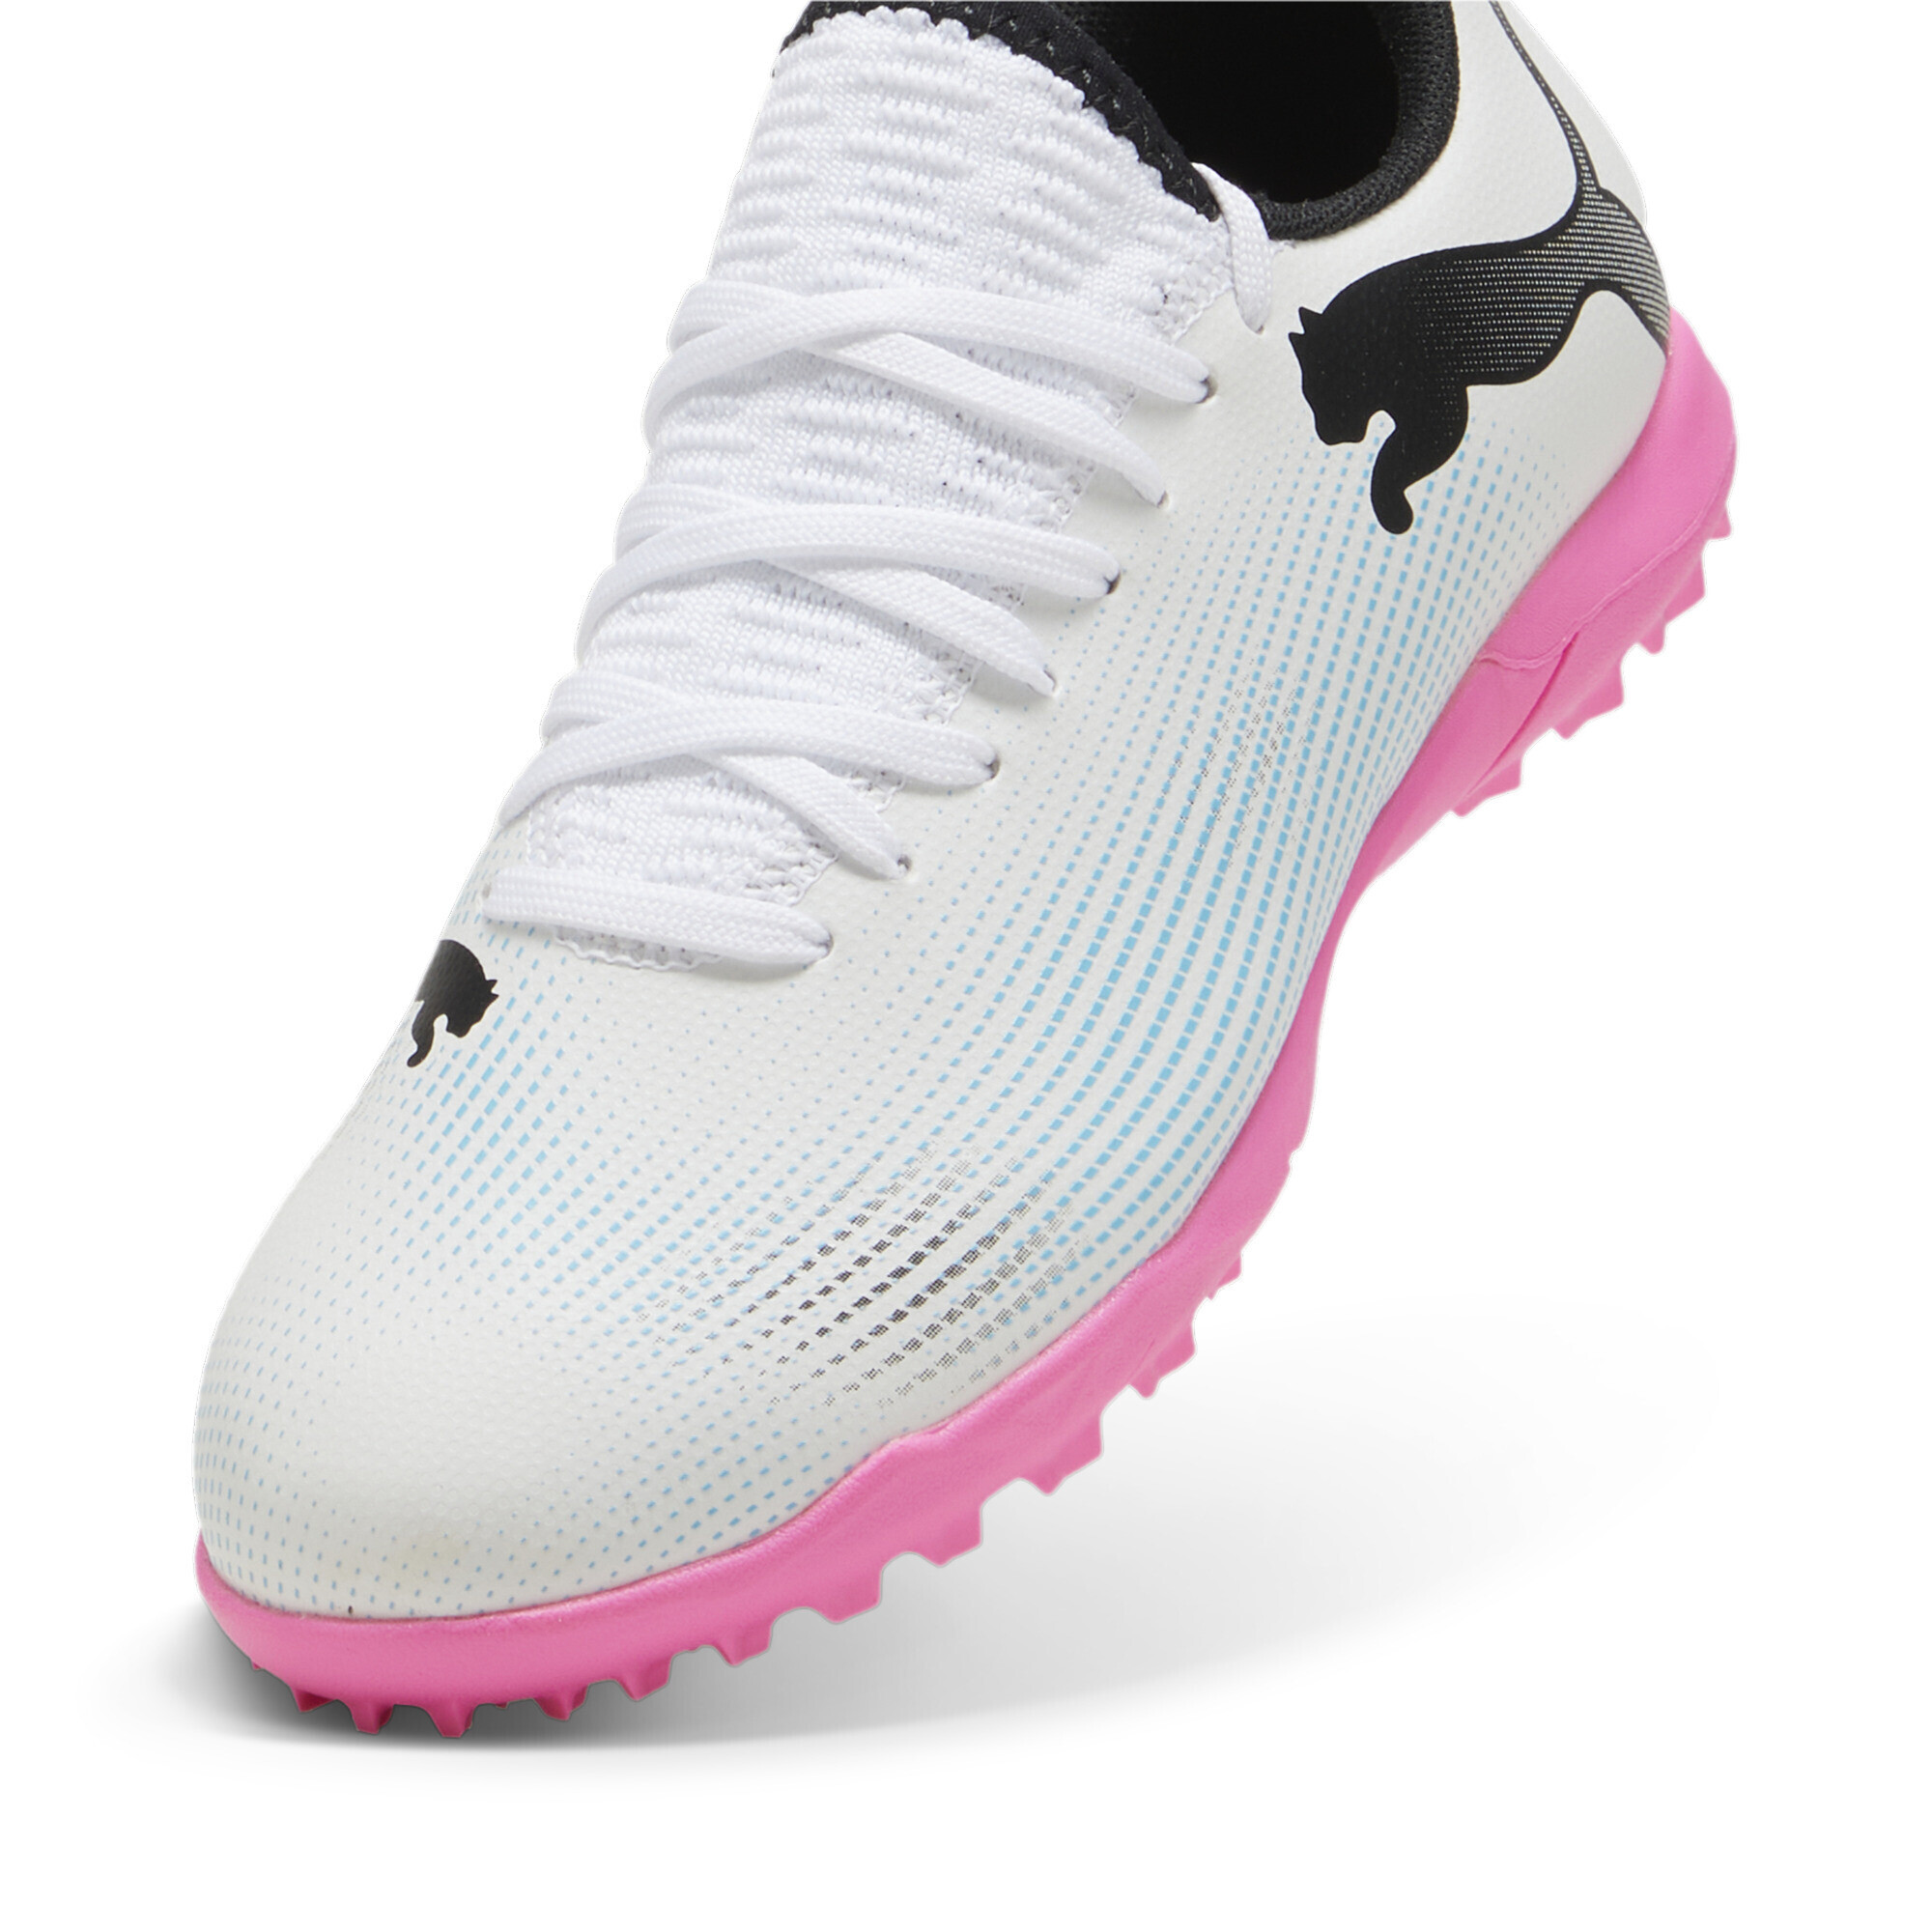 PUMA FUTURE 7 PLAY TT Youth Football Boots In White/Pink, Size EU 35